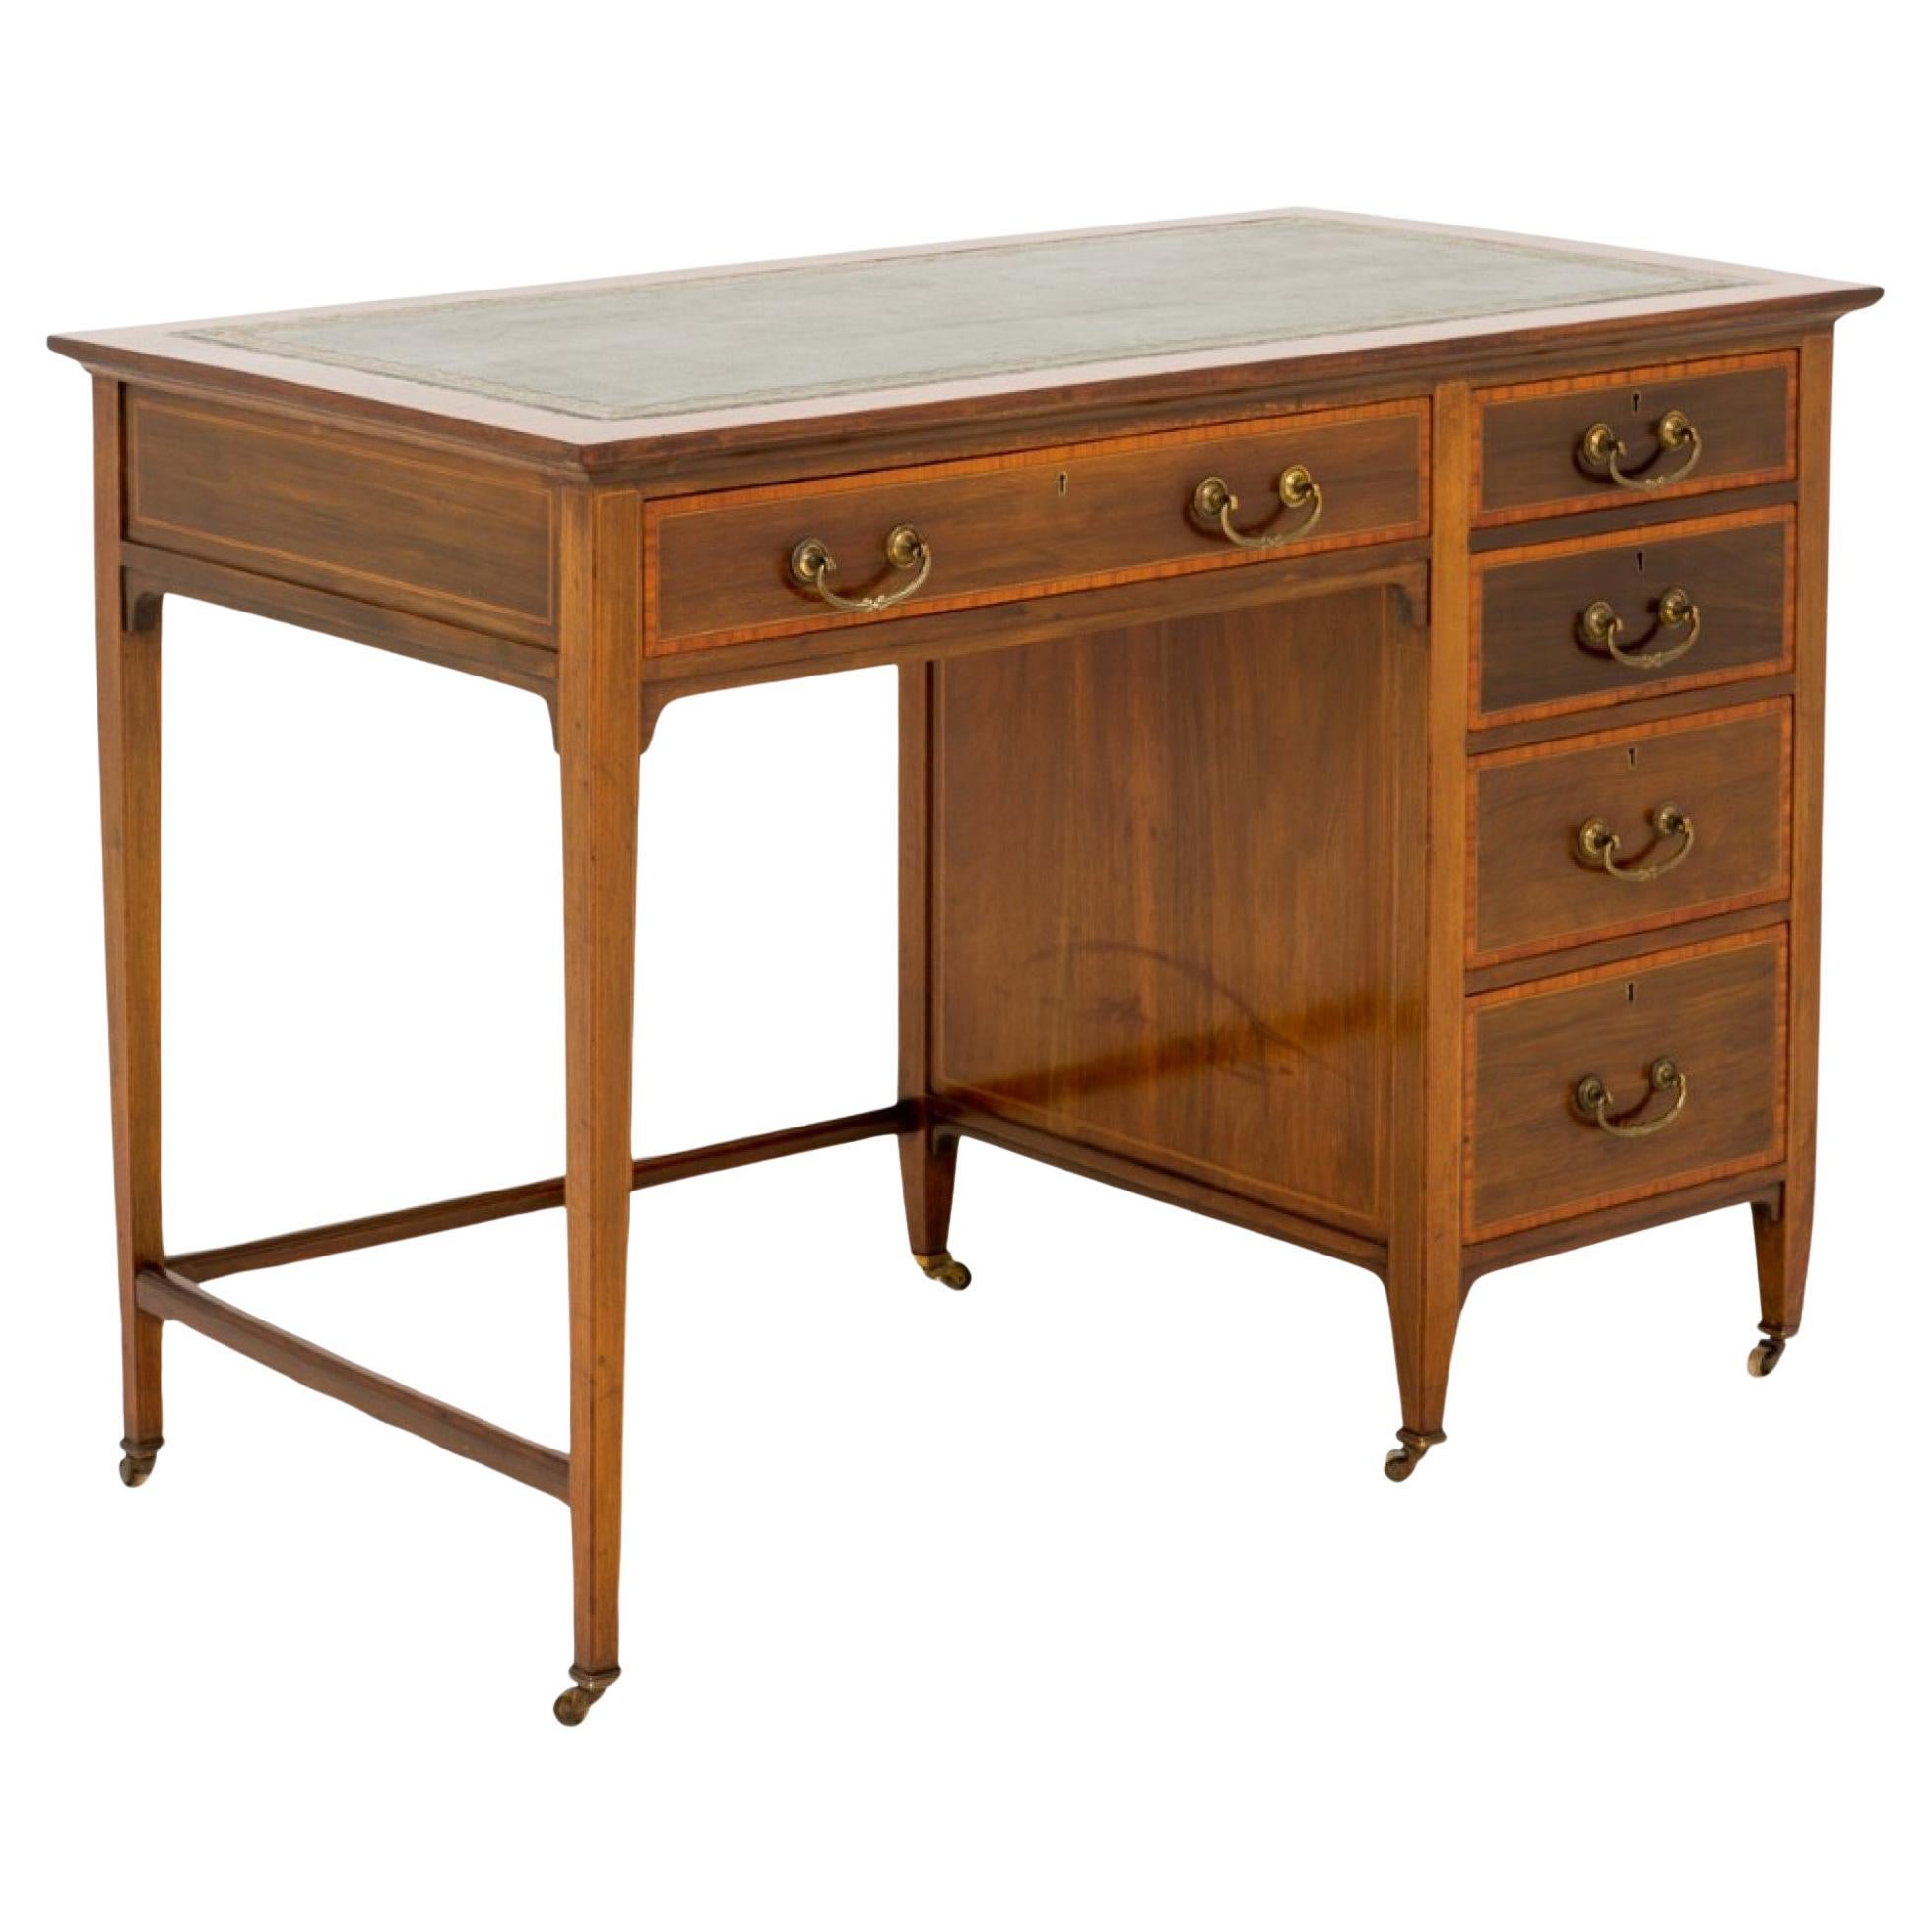 Very Pretty Sheraton Revival Mahogany Desk.
Standing on original Brass castors.
Circa 1890
The Mahogany Lined Drawers (note the fine dovetails) having satinwood crossbanding and retain the original handles and locks.
The top featuring a leather